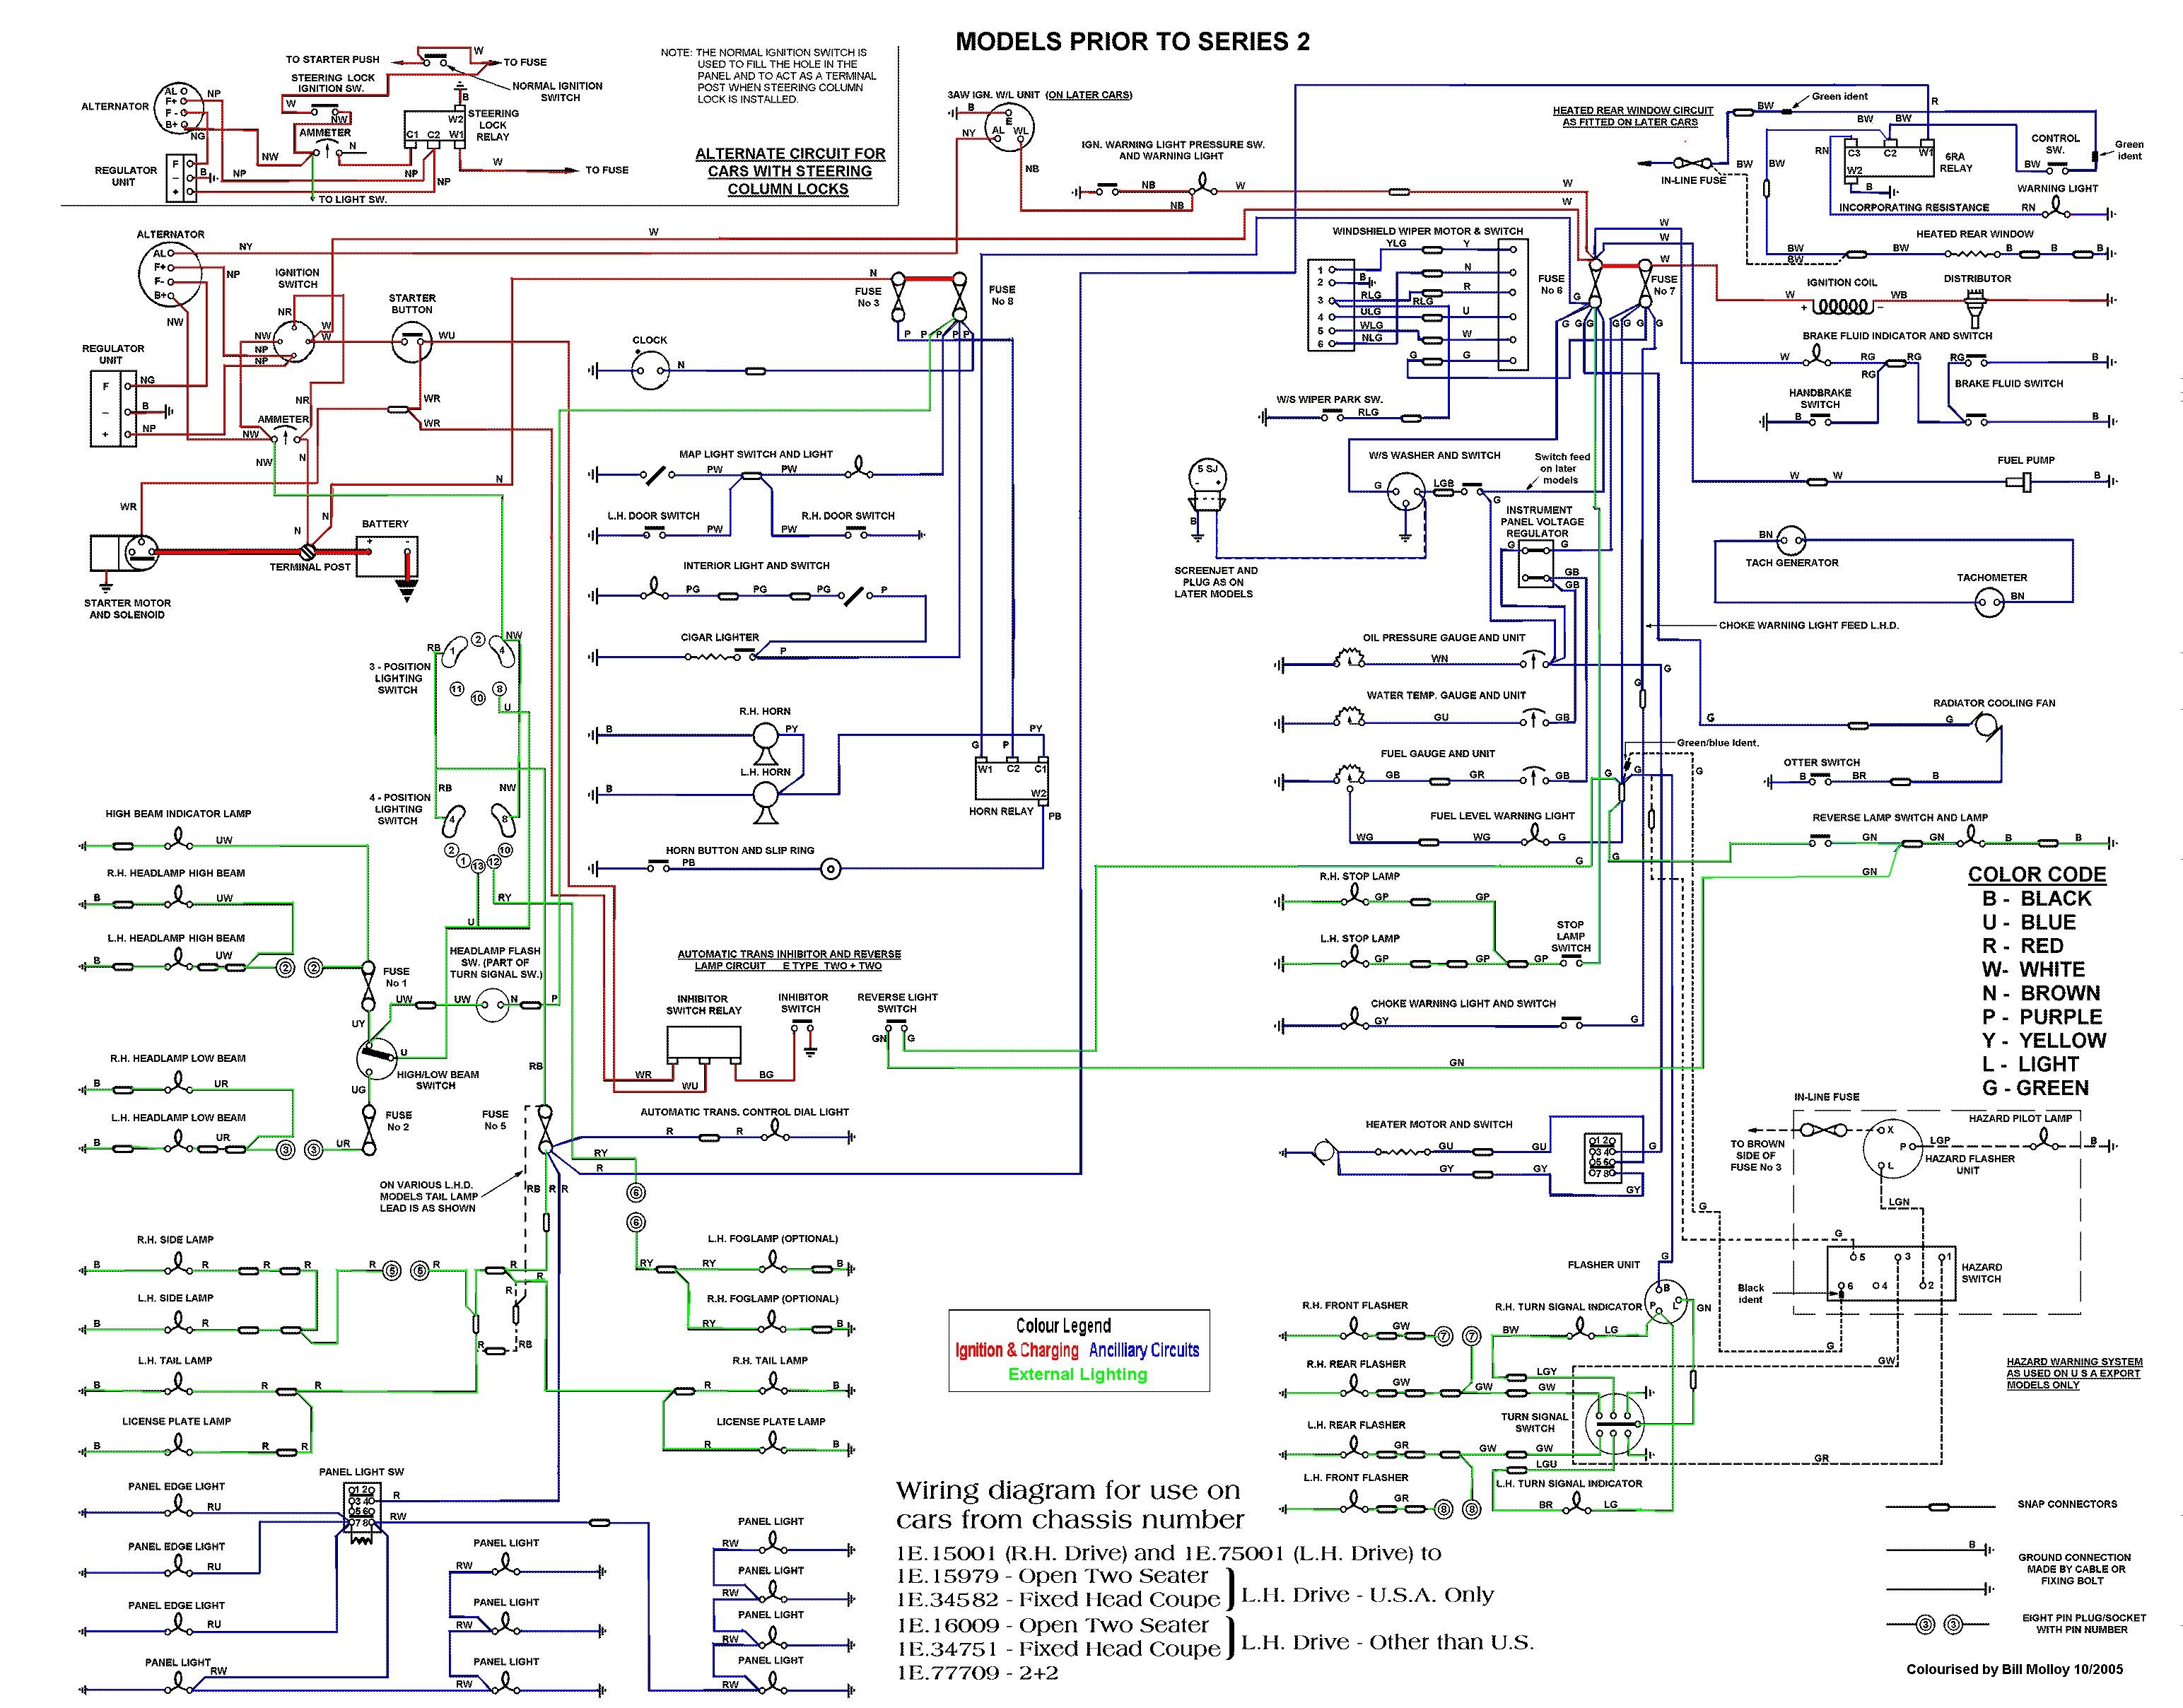 Fuse and Relay Diagram for 2000 Jaguar S-type 3.0 V6 Diagram] Jaguar S Type 2007 Wiring Diagram Full Version Hd Of Fuse and Relay Diagram for 2000 Jaguar S-type 3.0 V6